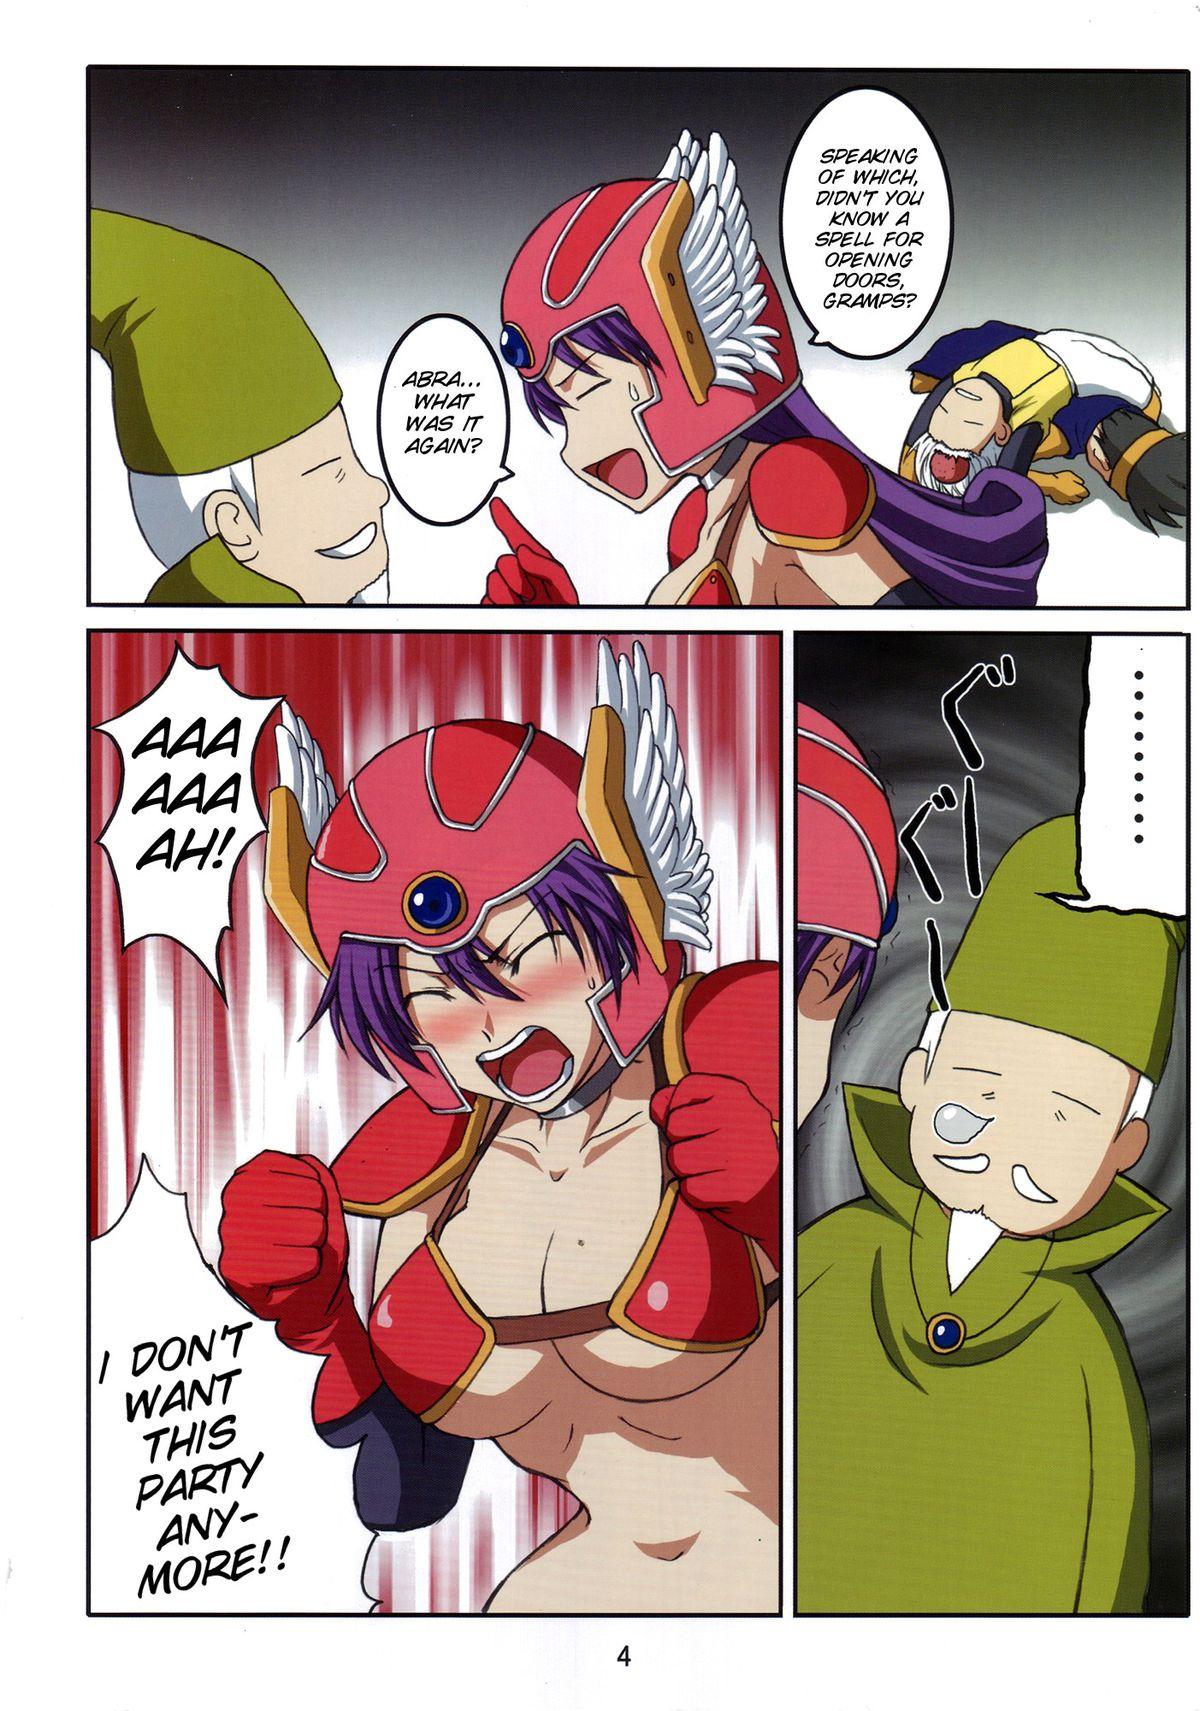 Blackmail Volcanic Drum Beats - Dragon quest iii Pervert - Page 5